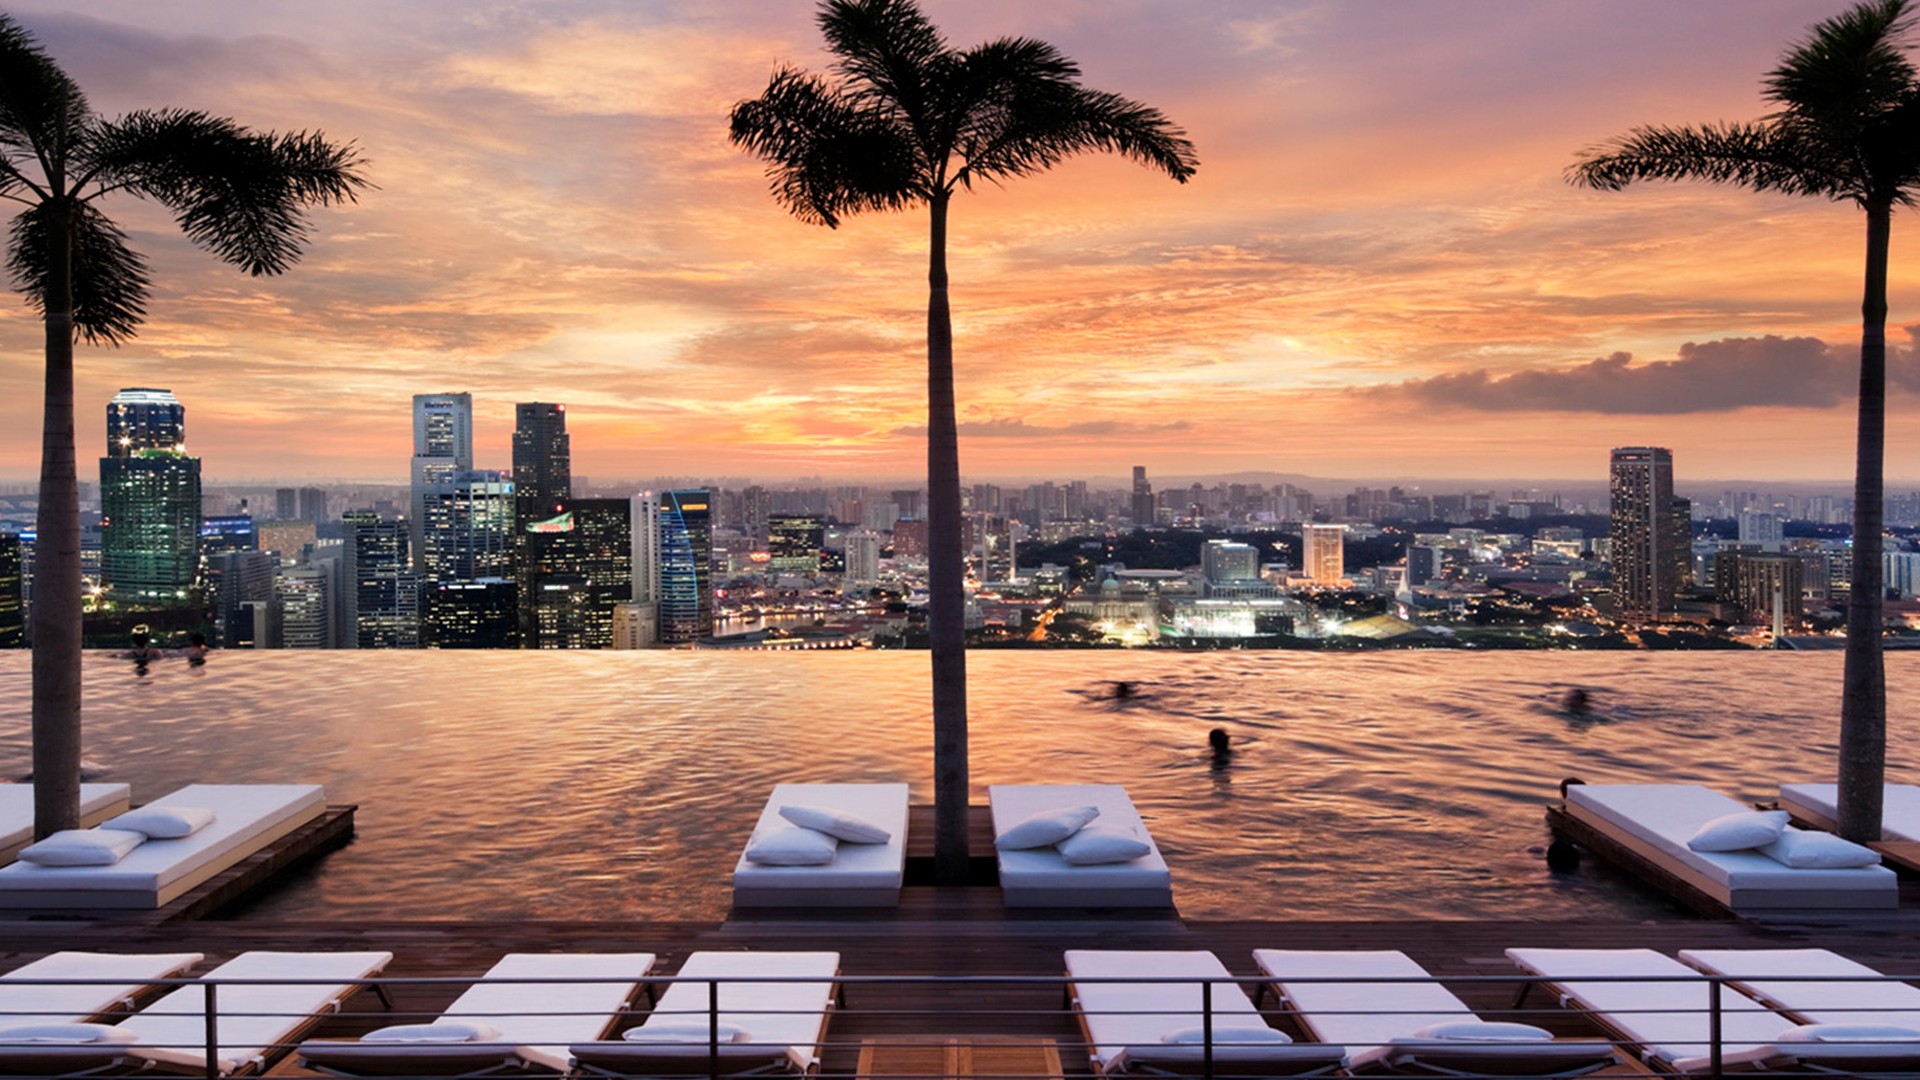 Marina Bay Sands Singapore Glamour with Rooftop Infinity Pool, Singapore, Singapore